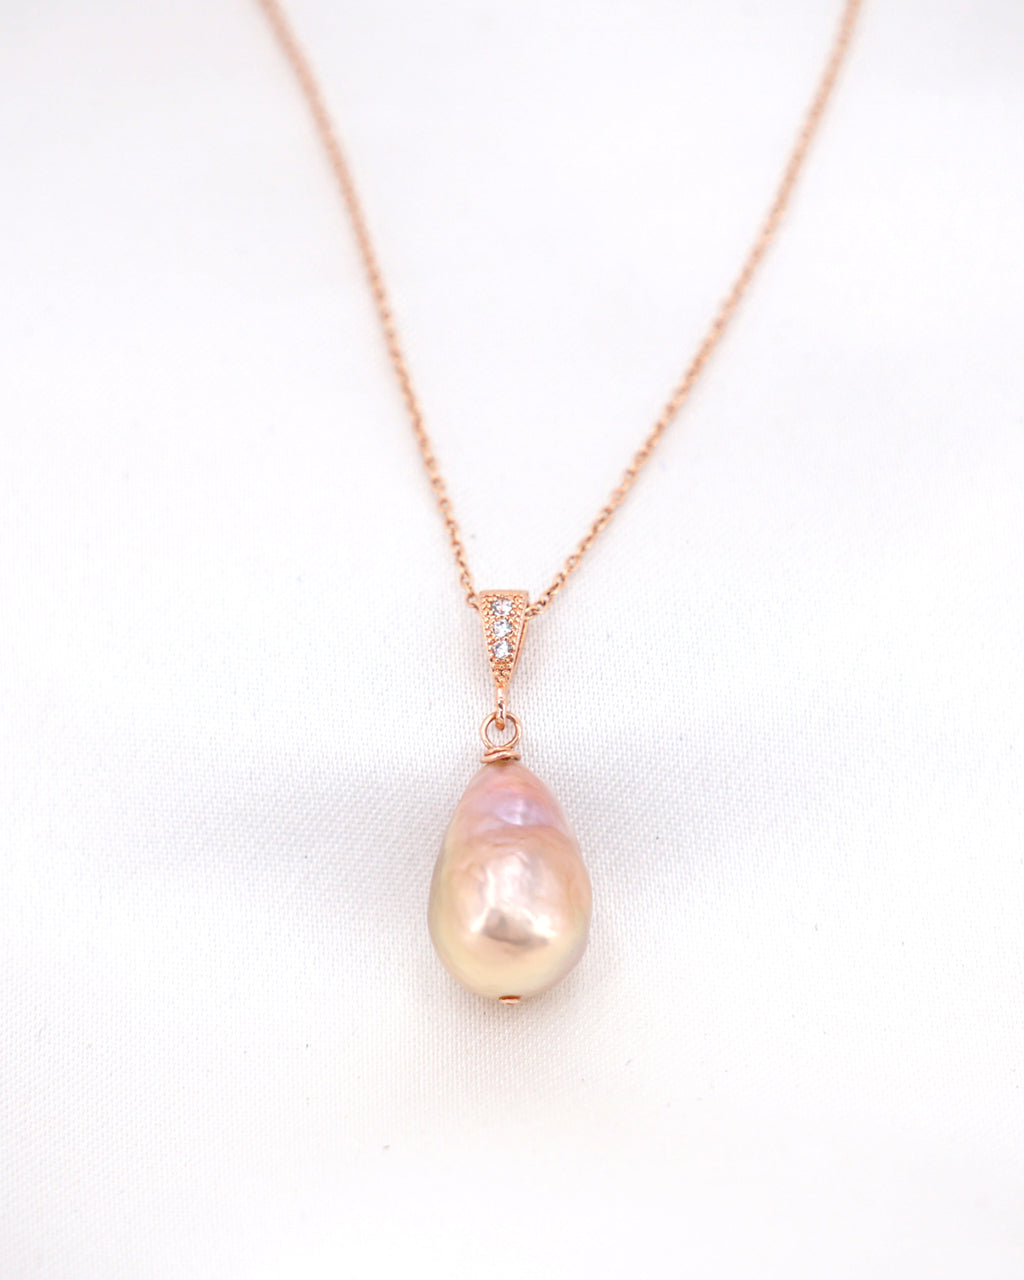 Peach Fuzz Baroque Pearl Necklace in Rose Gold